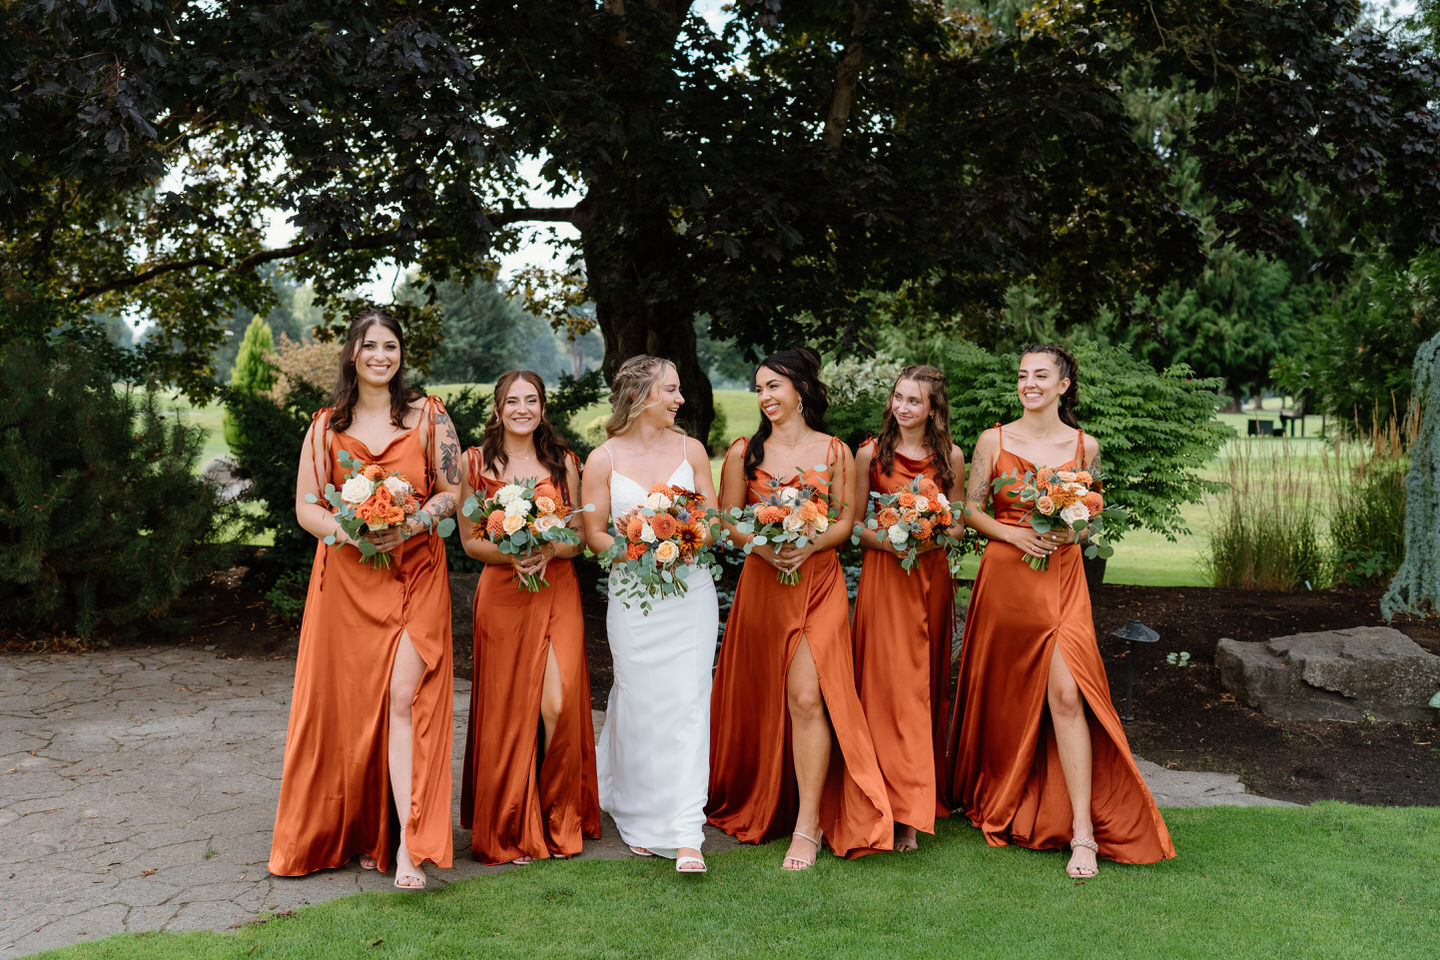 Bridesmaids walking together with their terracotta bouquets and dresses